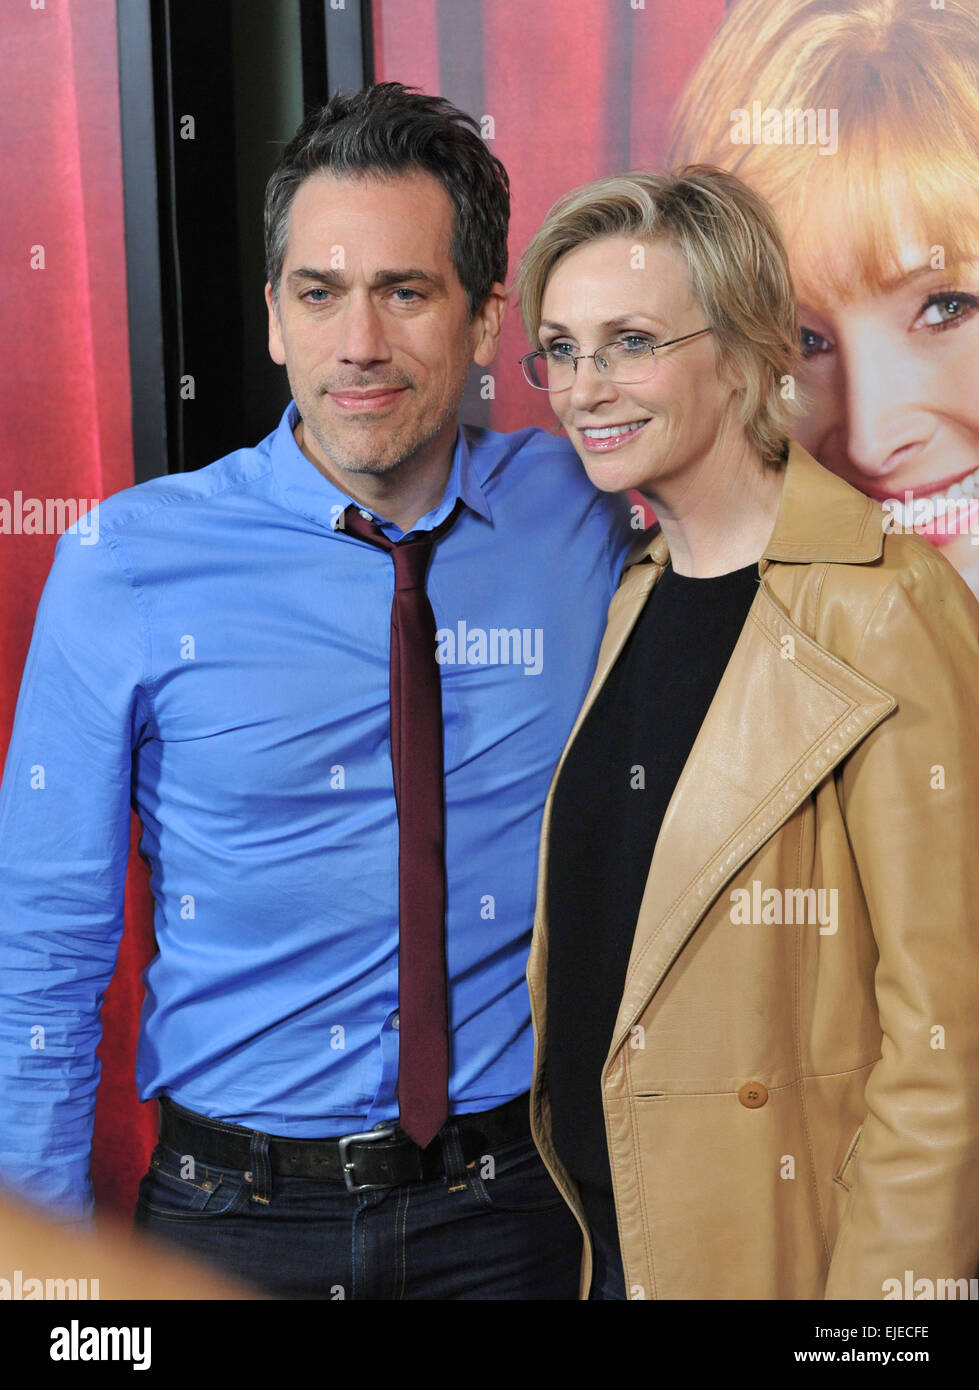 LOS ANGELES, CA - NOVEMBER 5, 2014: Jane Lynch & Paul Witten at the premiere of HBO TV series 'The Comeback' at the El Capitan Theatre, Hollywood. Stock Photo